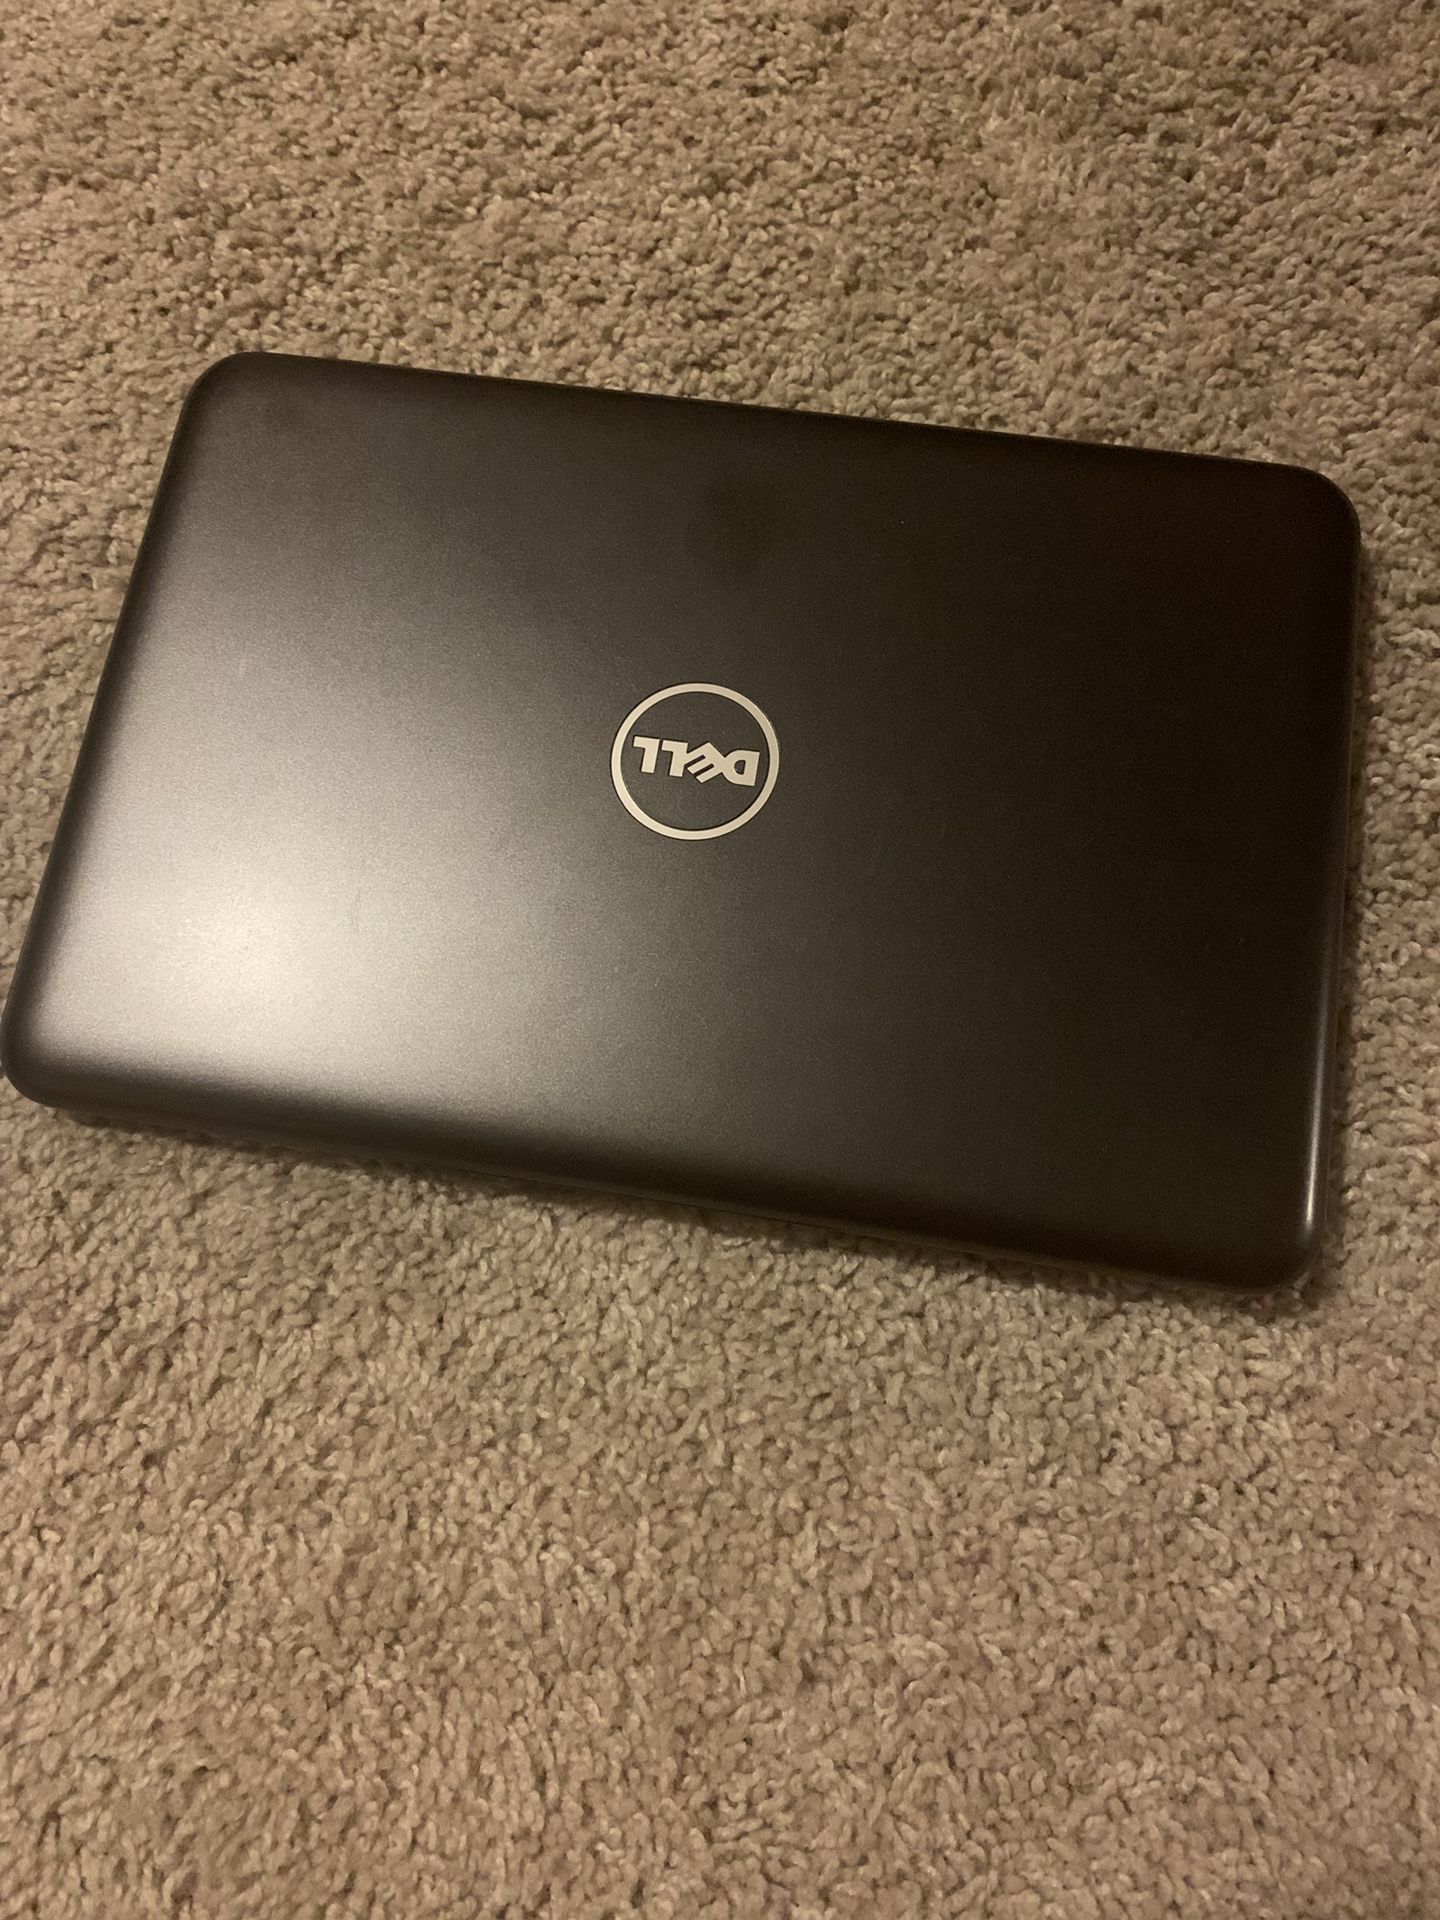 Small Dell Laptop